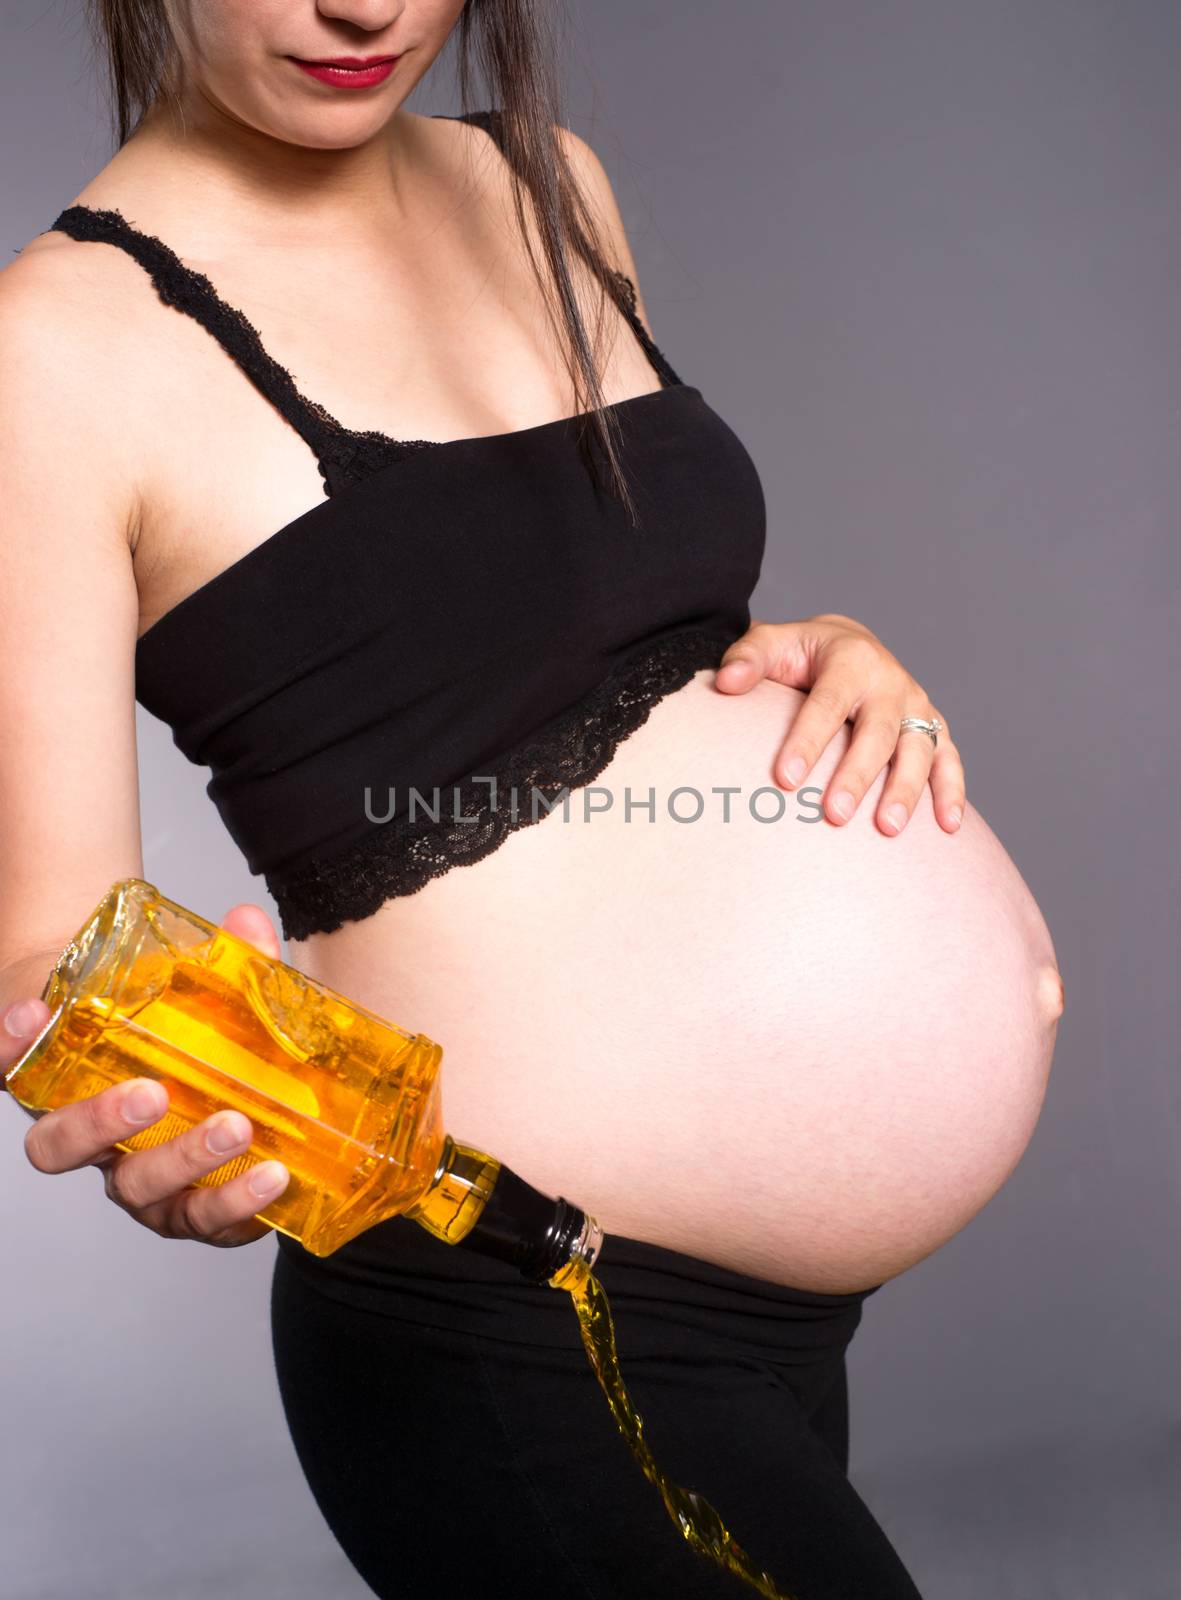 Pregnant Woman Alcoholic Expecting Baby Pours Alcohol Empties Wh by ChrisBoswell